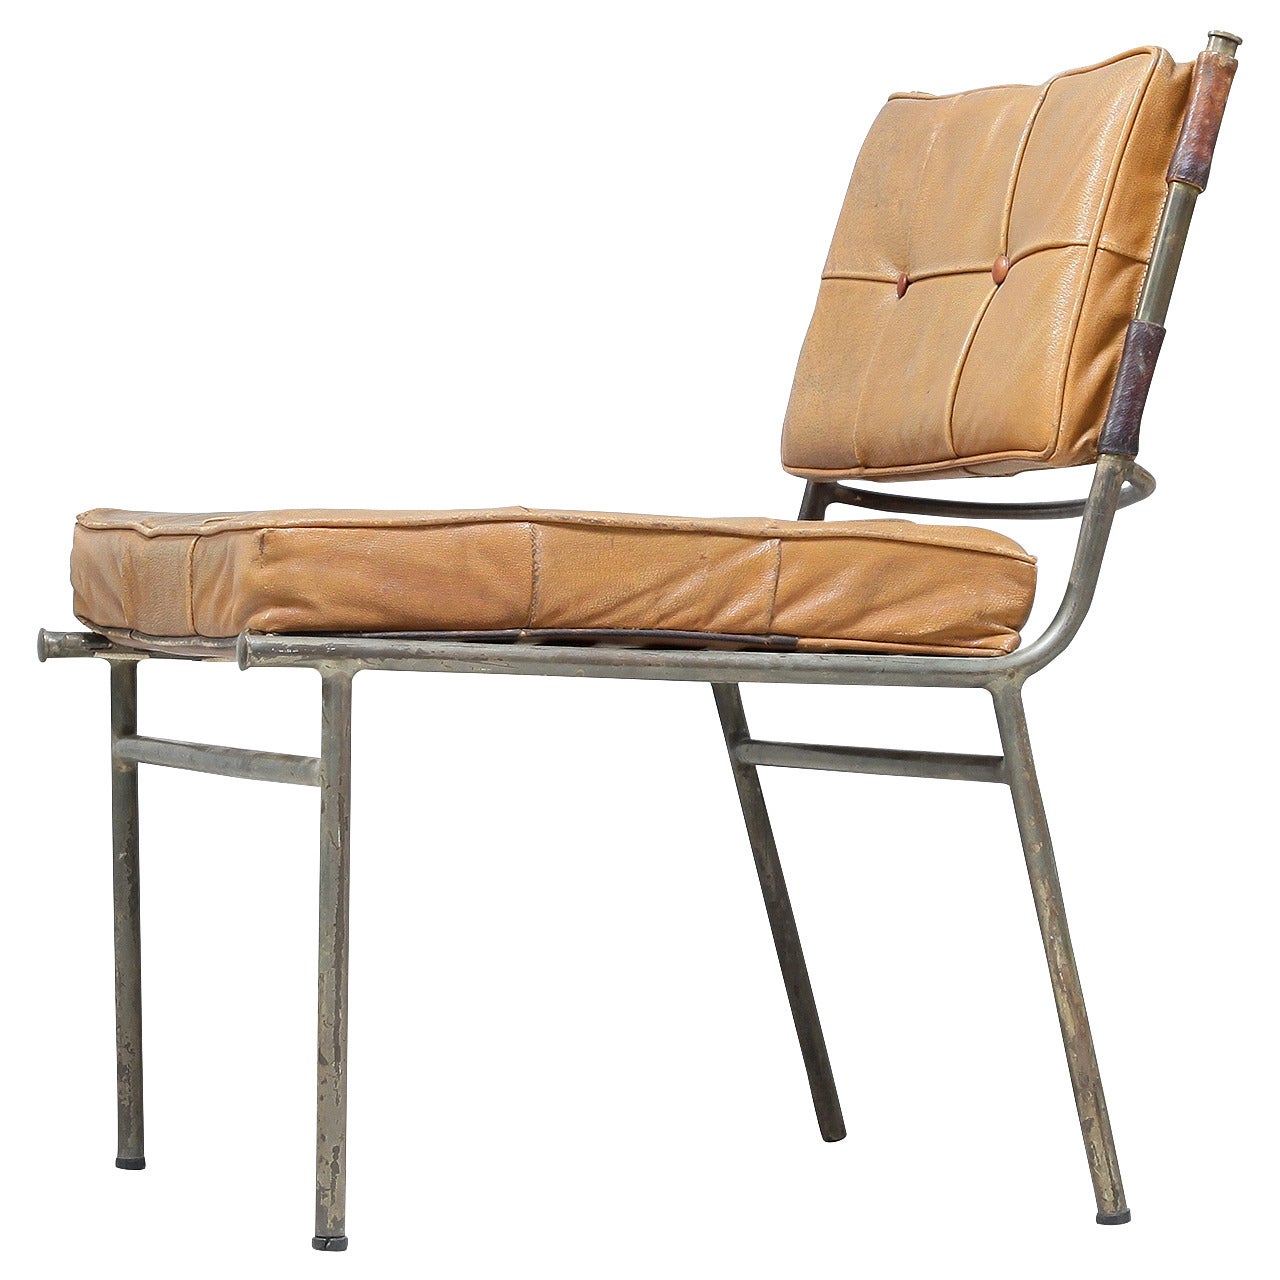 Rare Mathieu Matégot Chair with Brass Frame and Leather Seat and Back For Sale